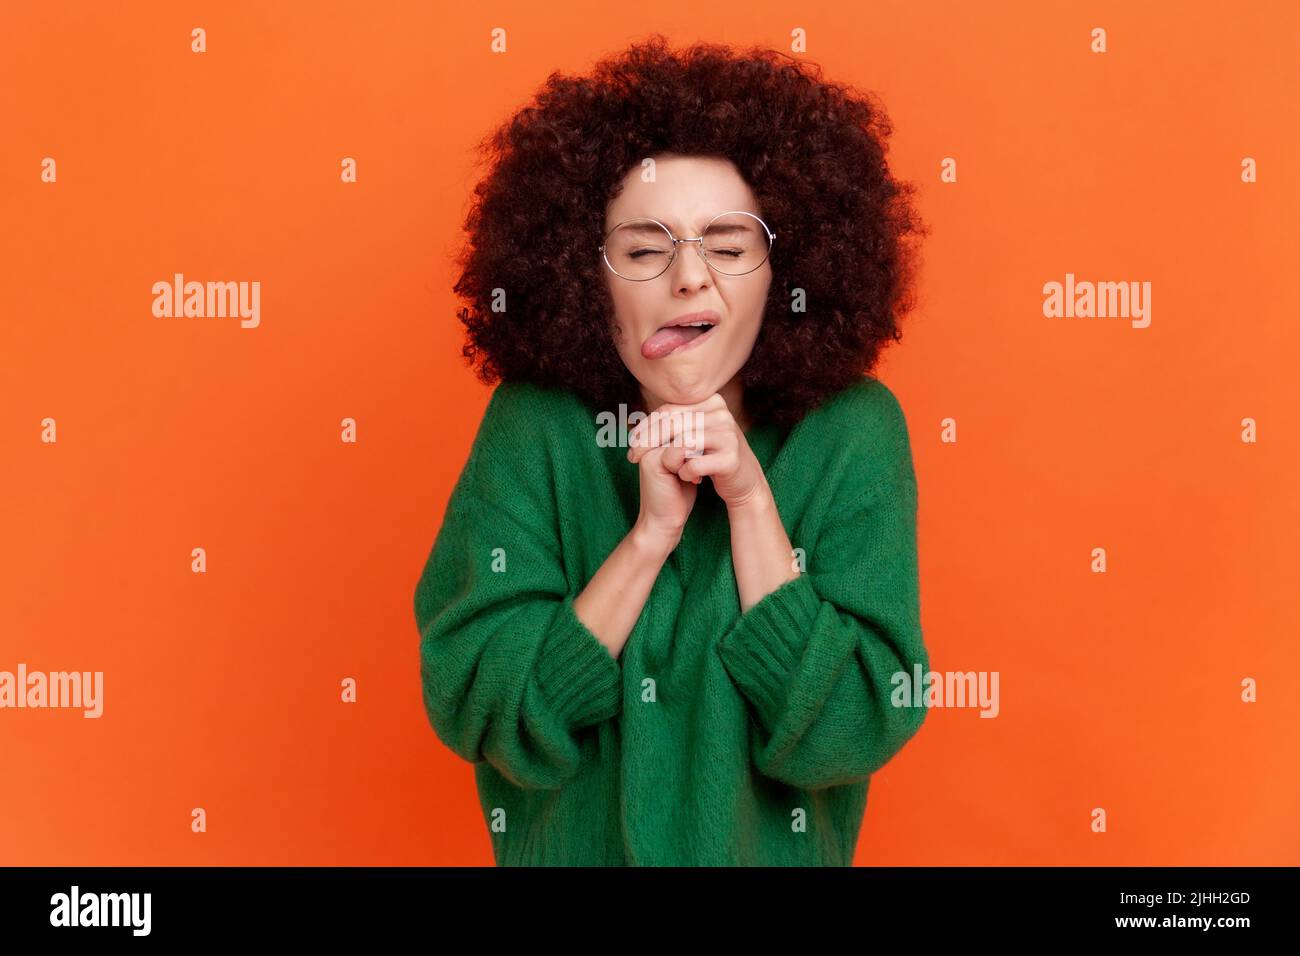 Portrait of funny woman with Afro hairstyle wearing green casual style sweater standing with fists under chin, keeps eyes closed, showing tongue out. Indoor studio shot isolated on orange background. Stock Photo